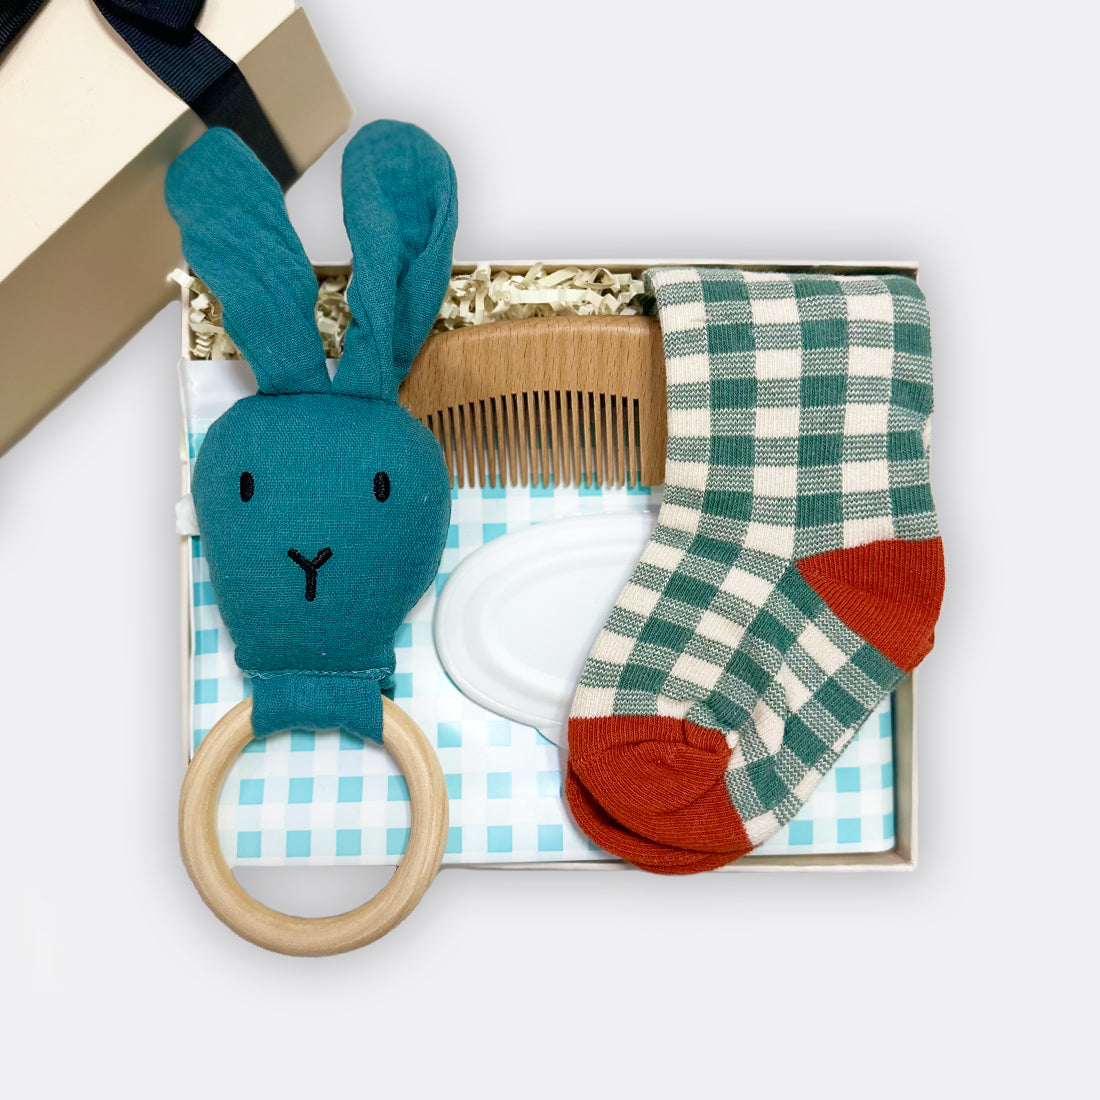 Bunny Rattle Wipe Pouch Wooden Comb Baby Carreaux Socks, shop the best gift gifts for her for him from Inna carton online store dubai, UAE!